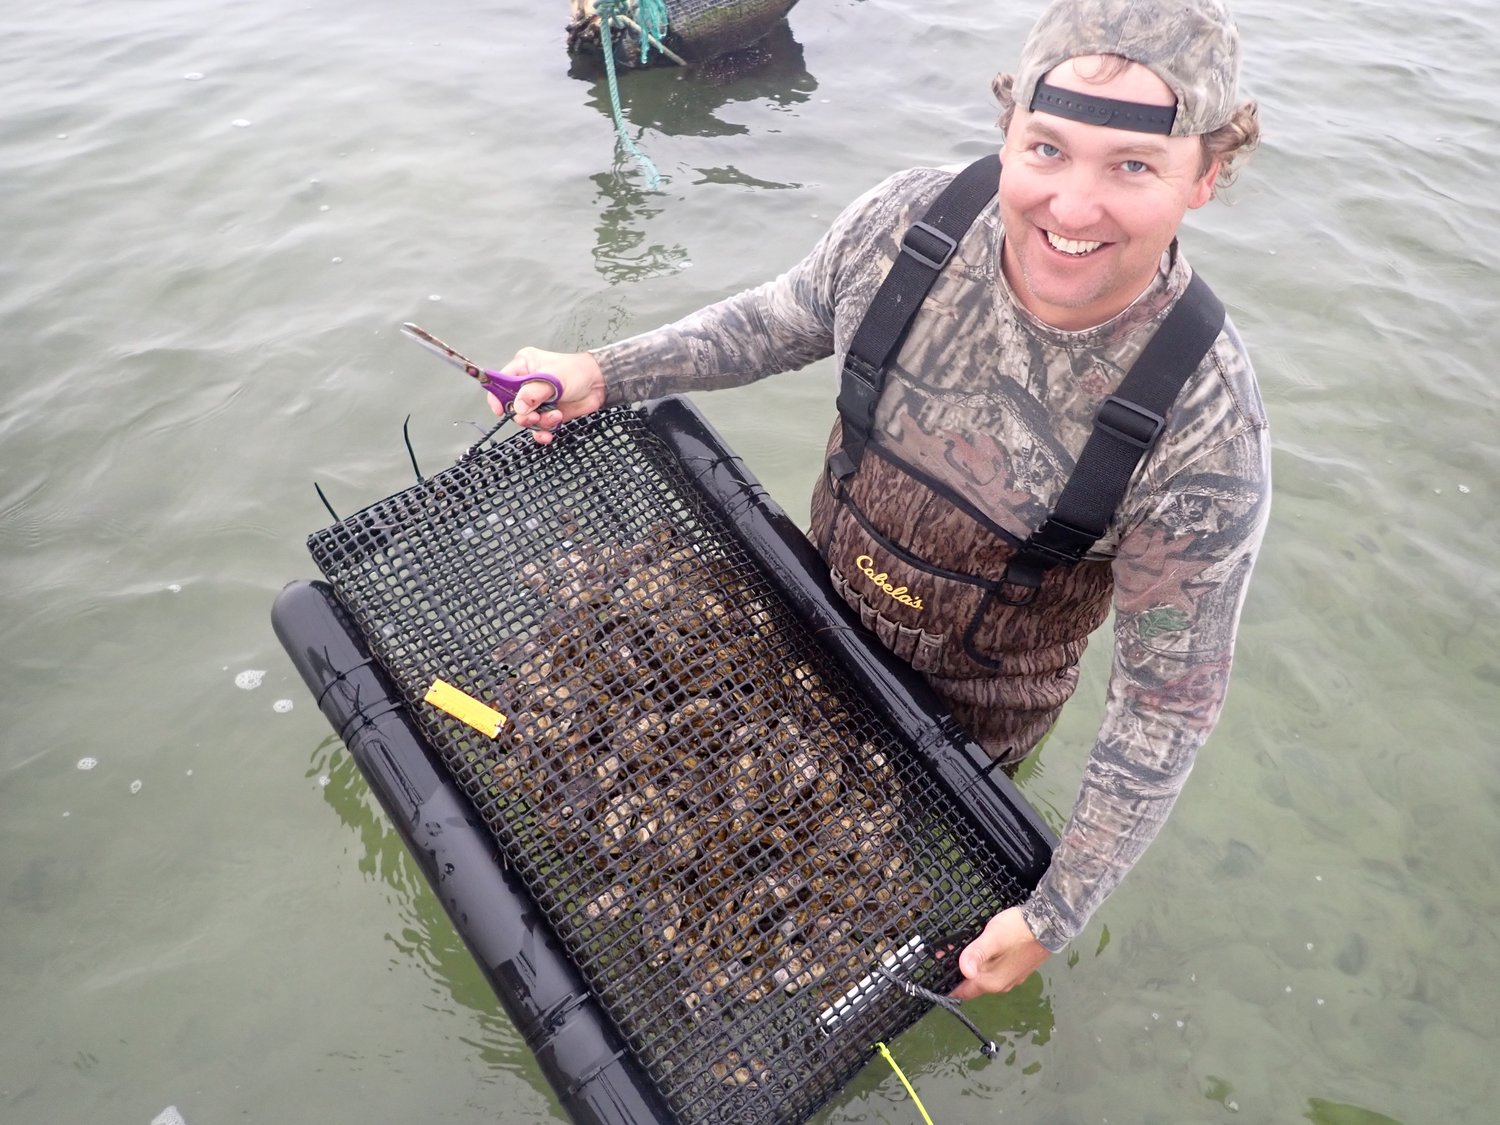 Oyster grower